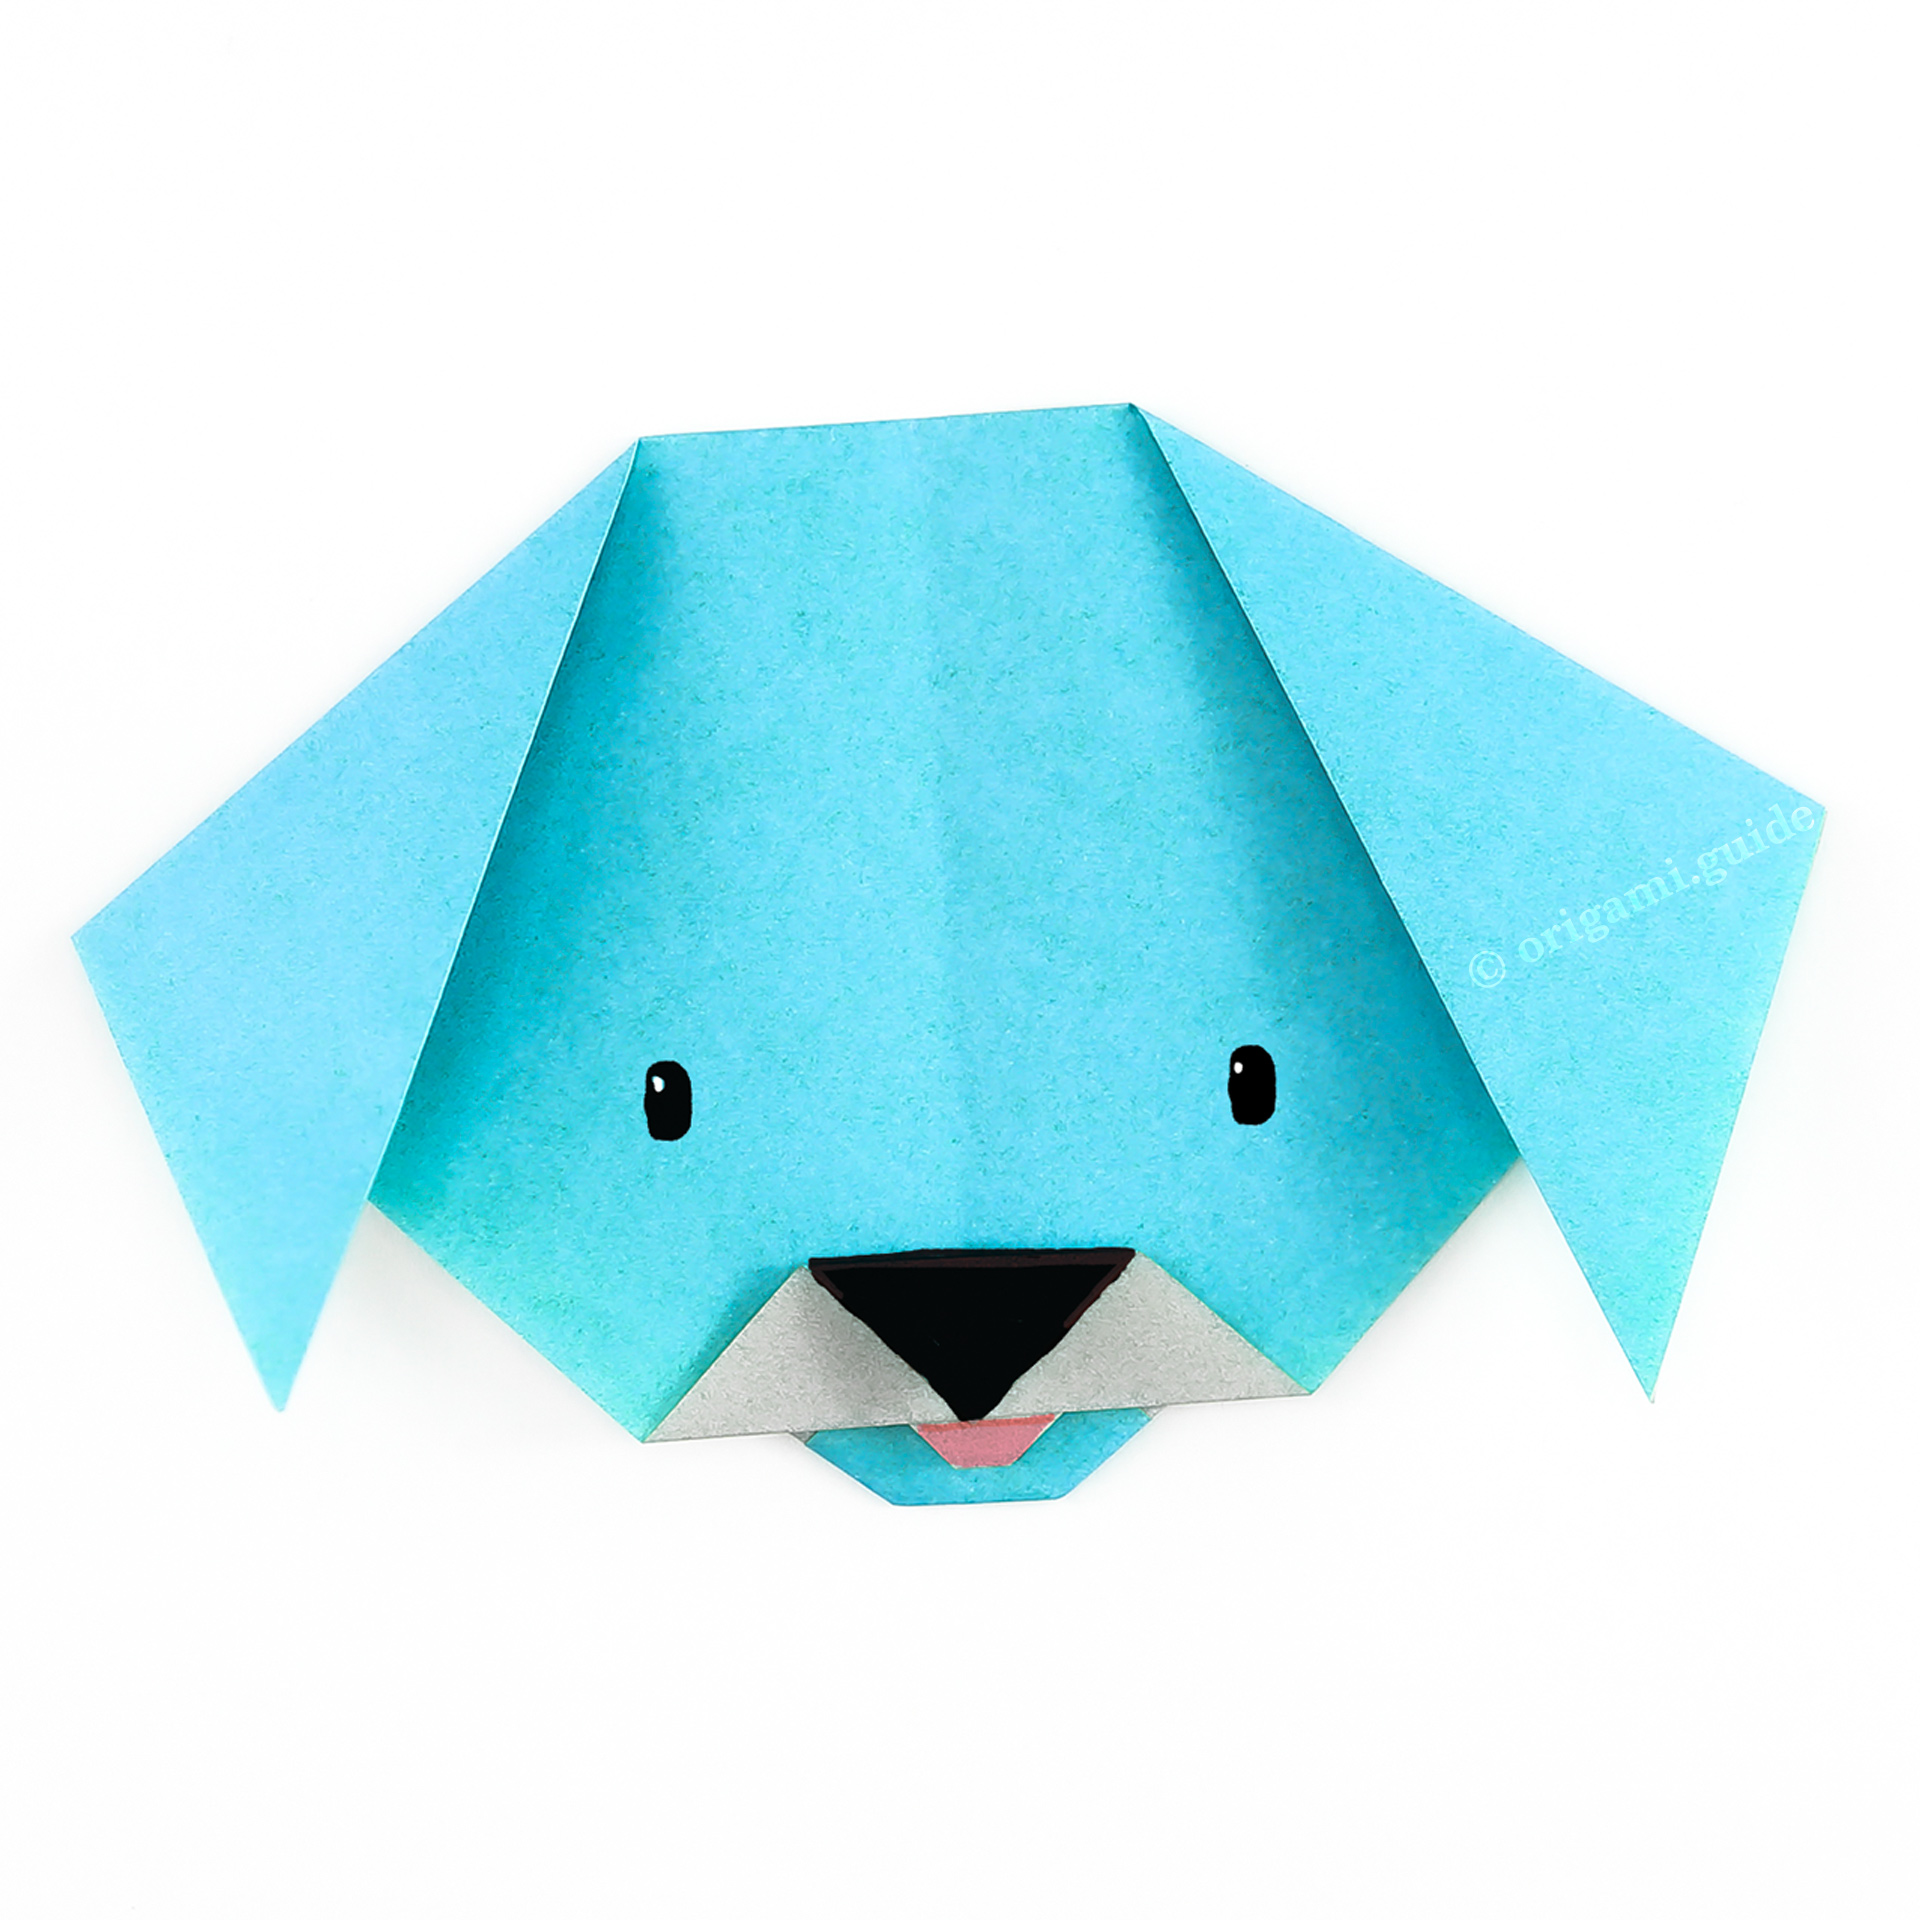 How To Fold An Easy Origami Dog Face - Folding Instructions - Origami Guide